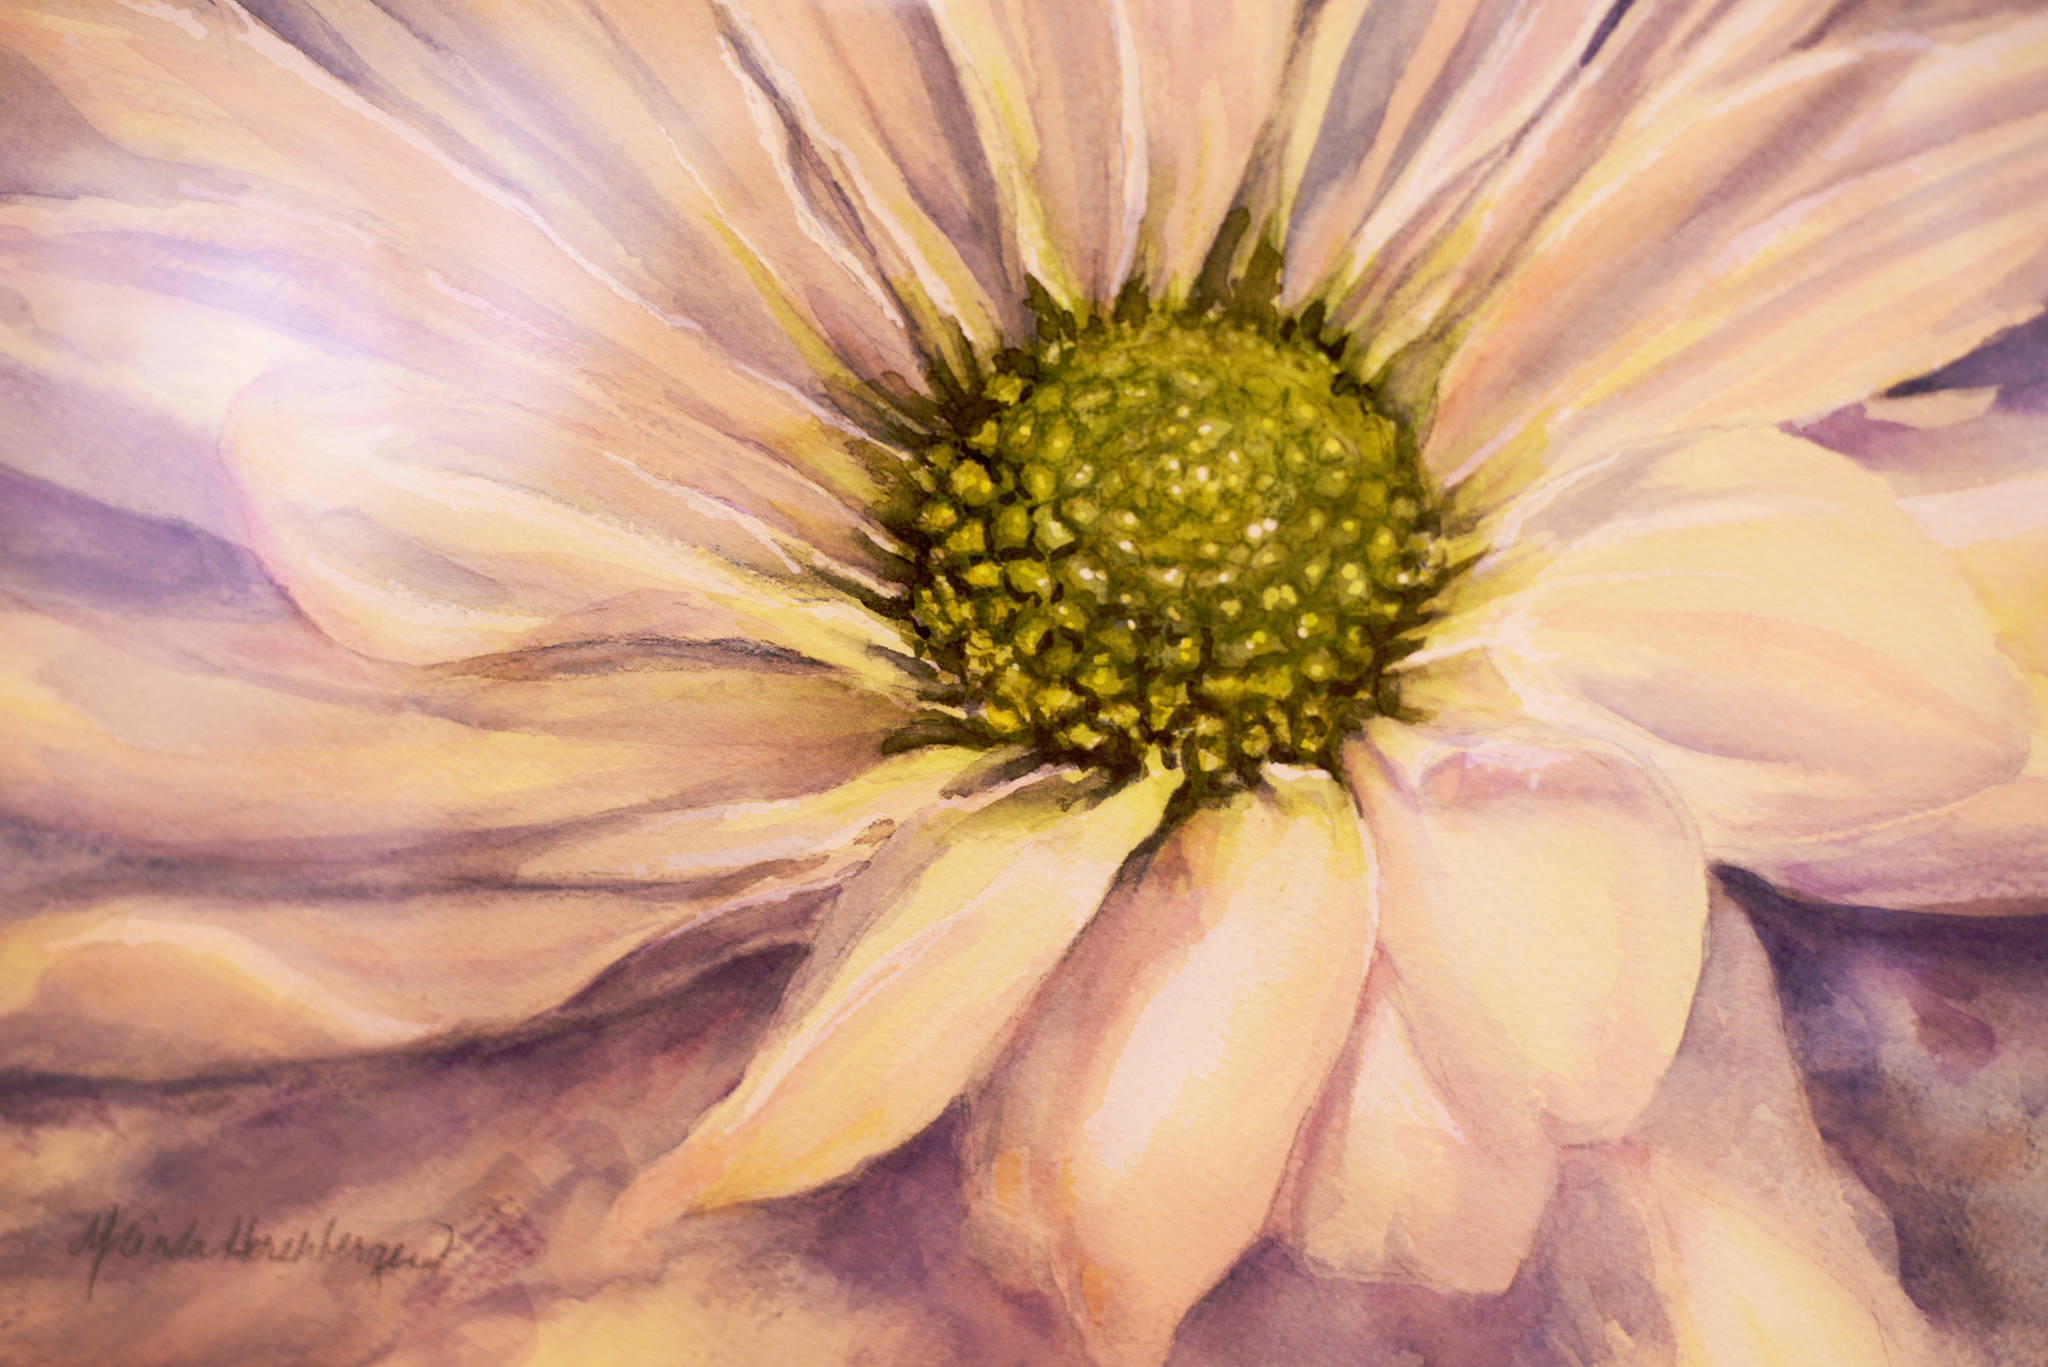 A watercolor flower by Melinda Hershberger hangs at the Kenai Fine Arts Center on Wednesday, May 2 in Kenai. Hershberger’s painting is part of the watercolor exhibit that will show there until May 25, with an opening reception on Thursday May, 3 from 5 p.m to 7 p.m. (Ben Boettger/Peninsula Clarion)